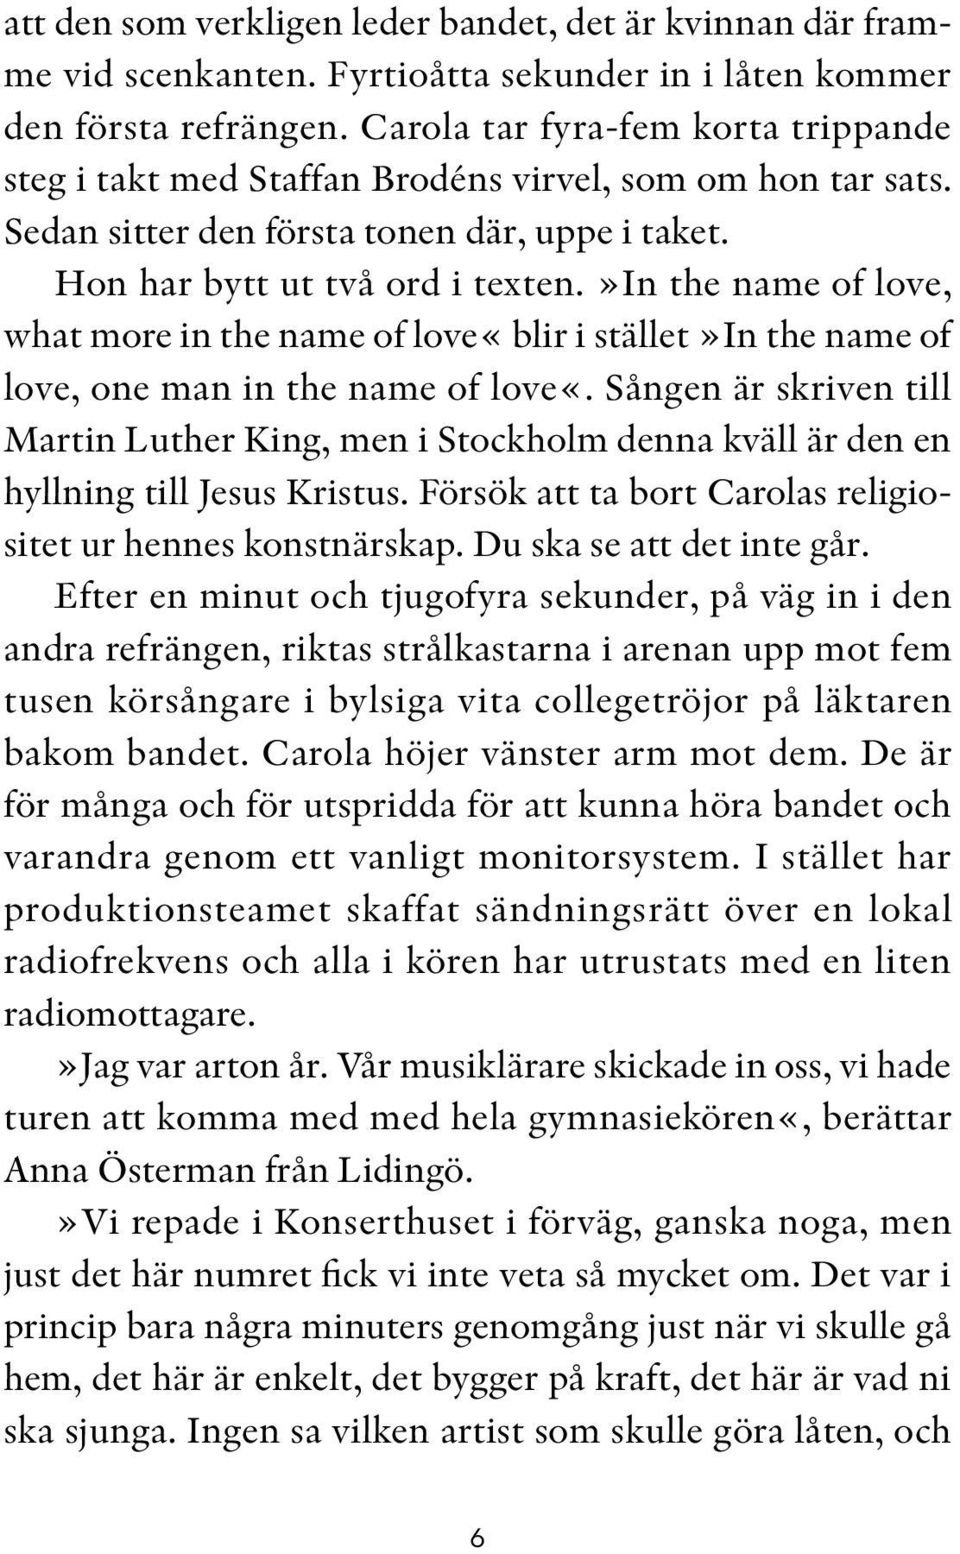 »in the name of love, what more in the name of love«blir i stället»in the name of love, one man in the name of love«.